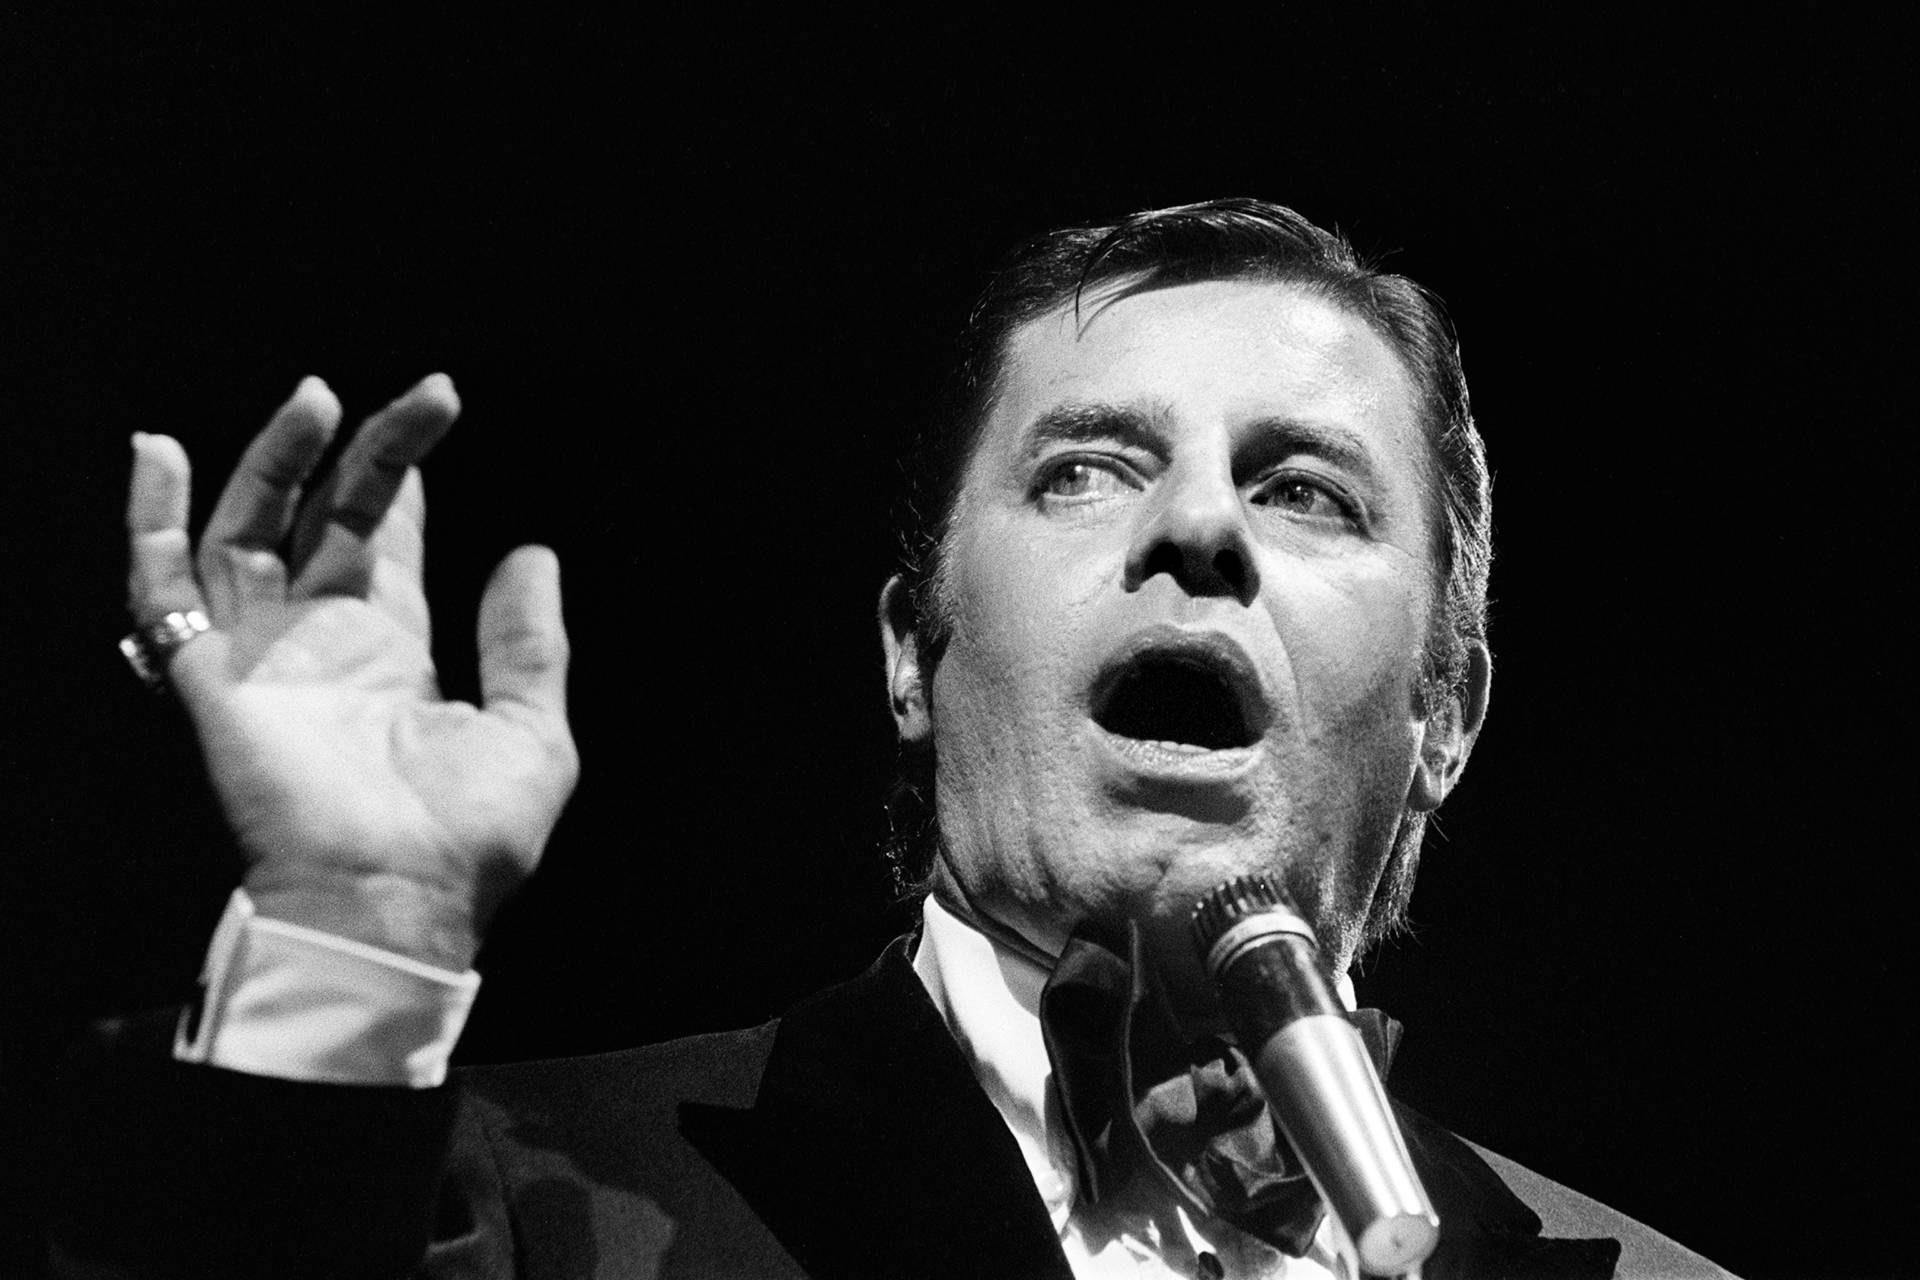 Jerry Lewis performs in Paris in 1976. Lewis, who appeared in dozens of films throughout his career, was perhaps nowhere more critically acclaimed than in France, where he earned the country's highest civilian honor. Photo: STF/AFP/Getty Images